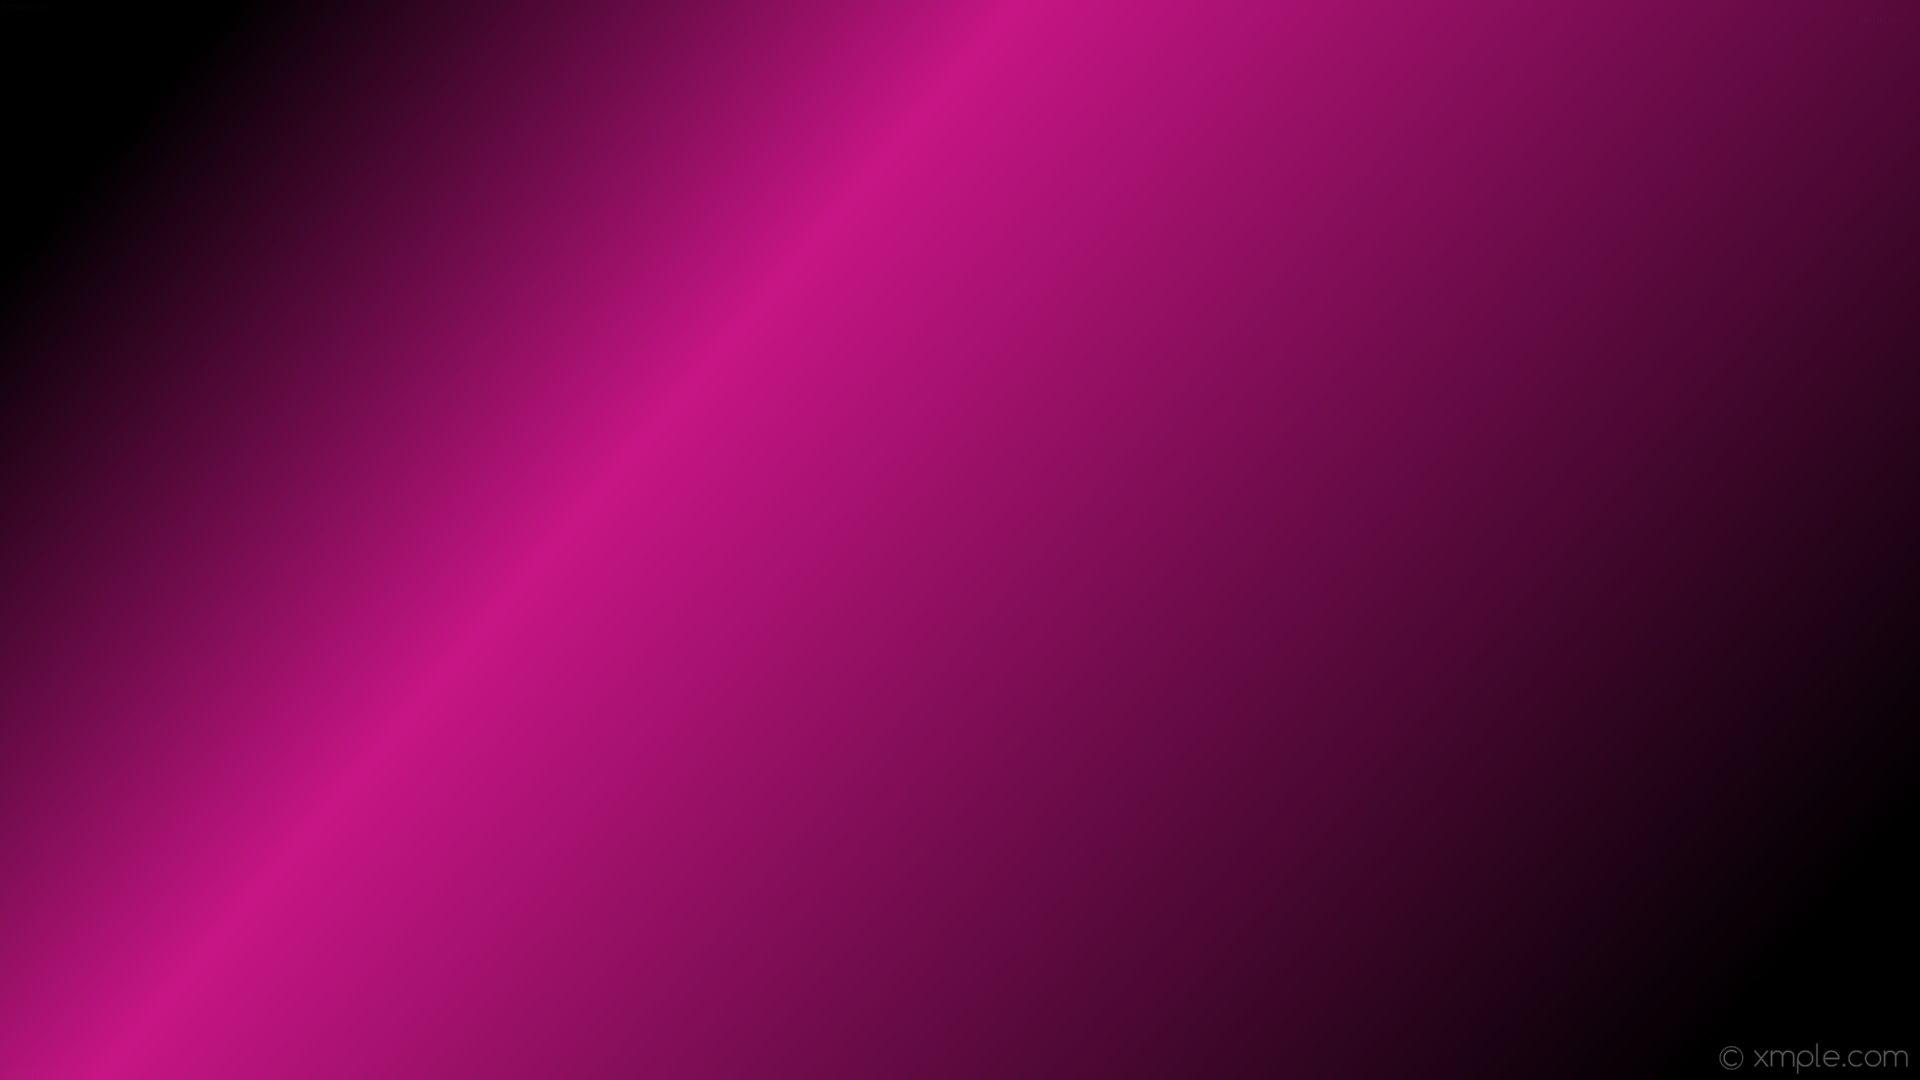 Pink Gradient Pictures  Download Free Images on Unsplash